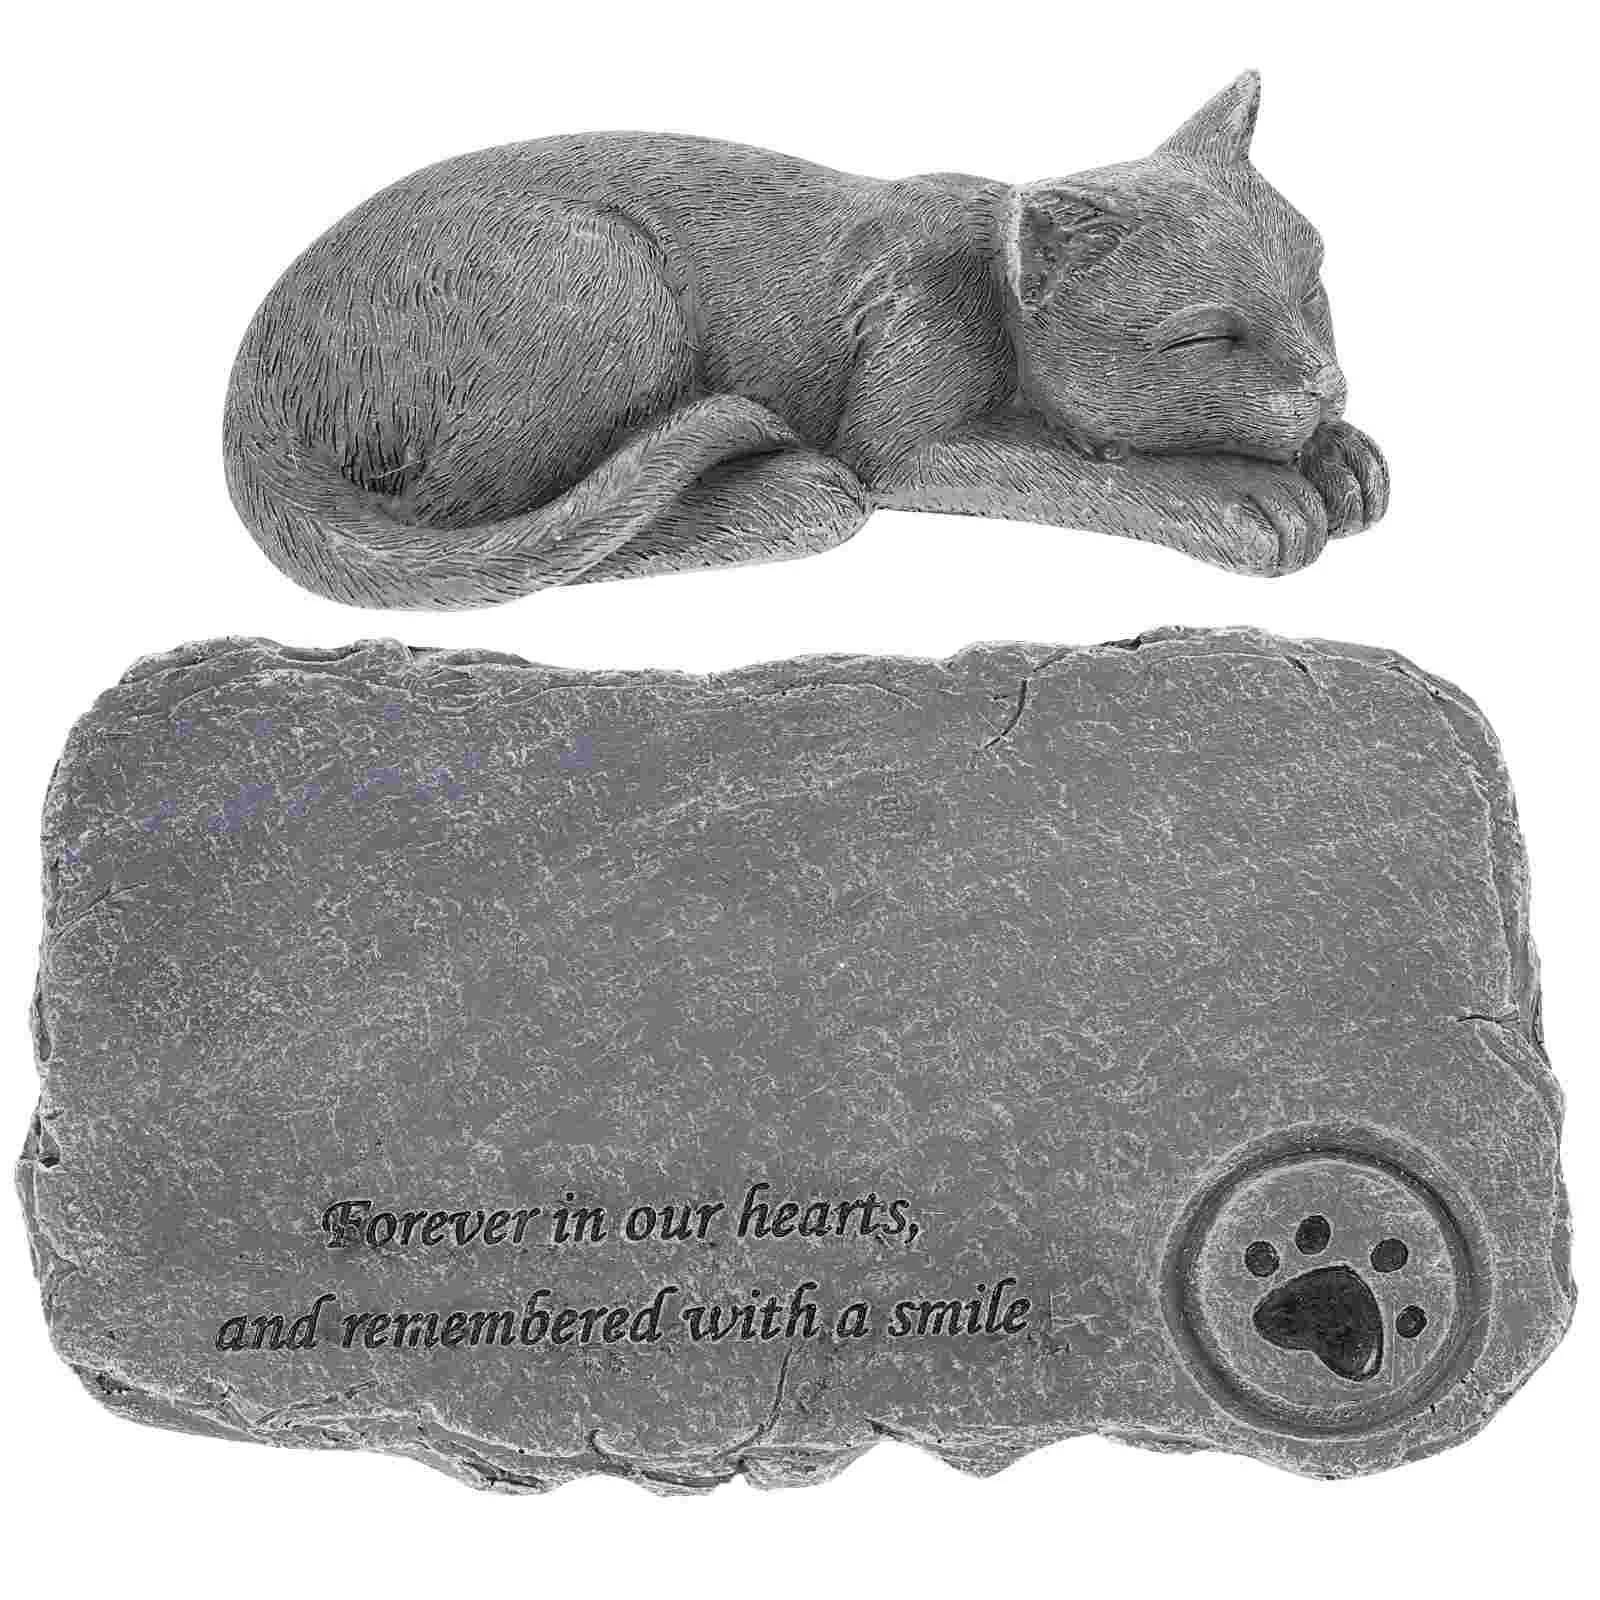 

Kitten Dog Ornament Animal Memorial Stones Cat Pet Tribute Statue Garden Tombstone Remembrance Resin Gift Outdoor Decorations